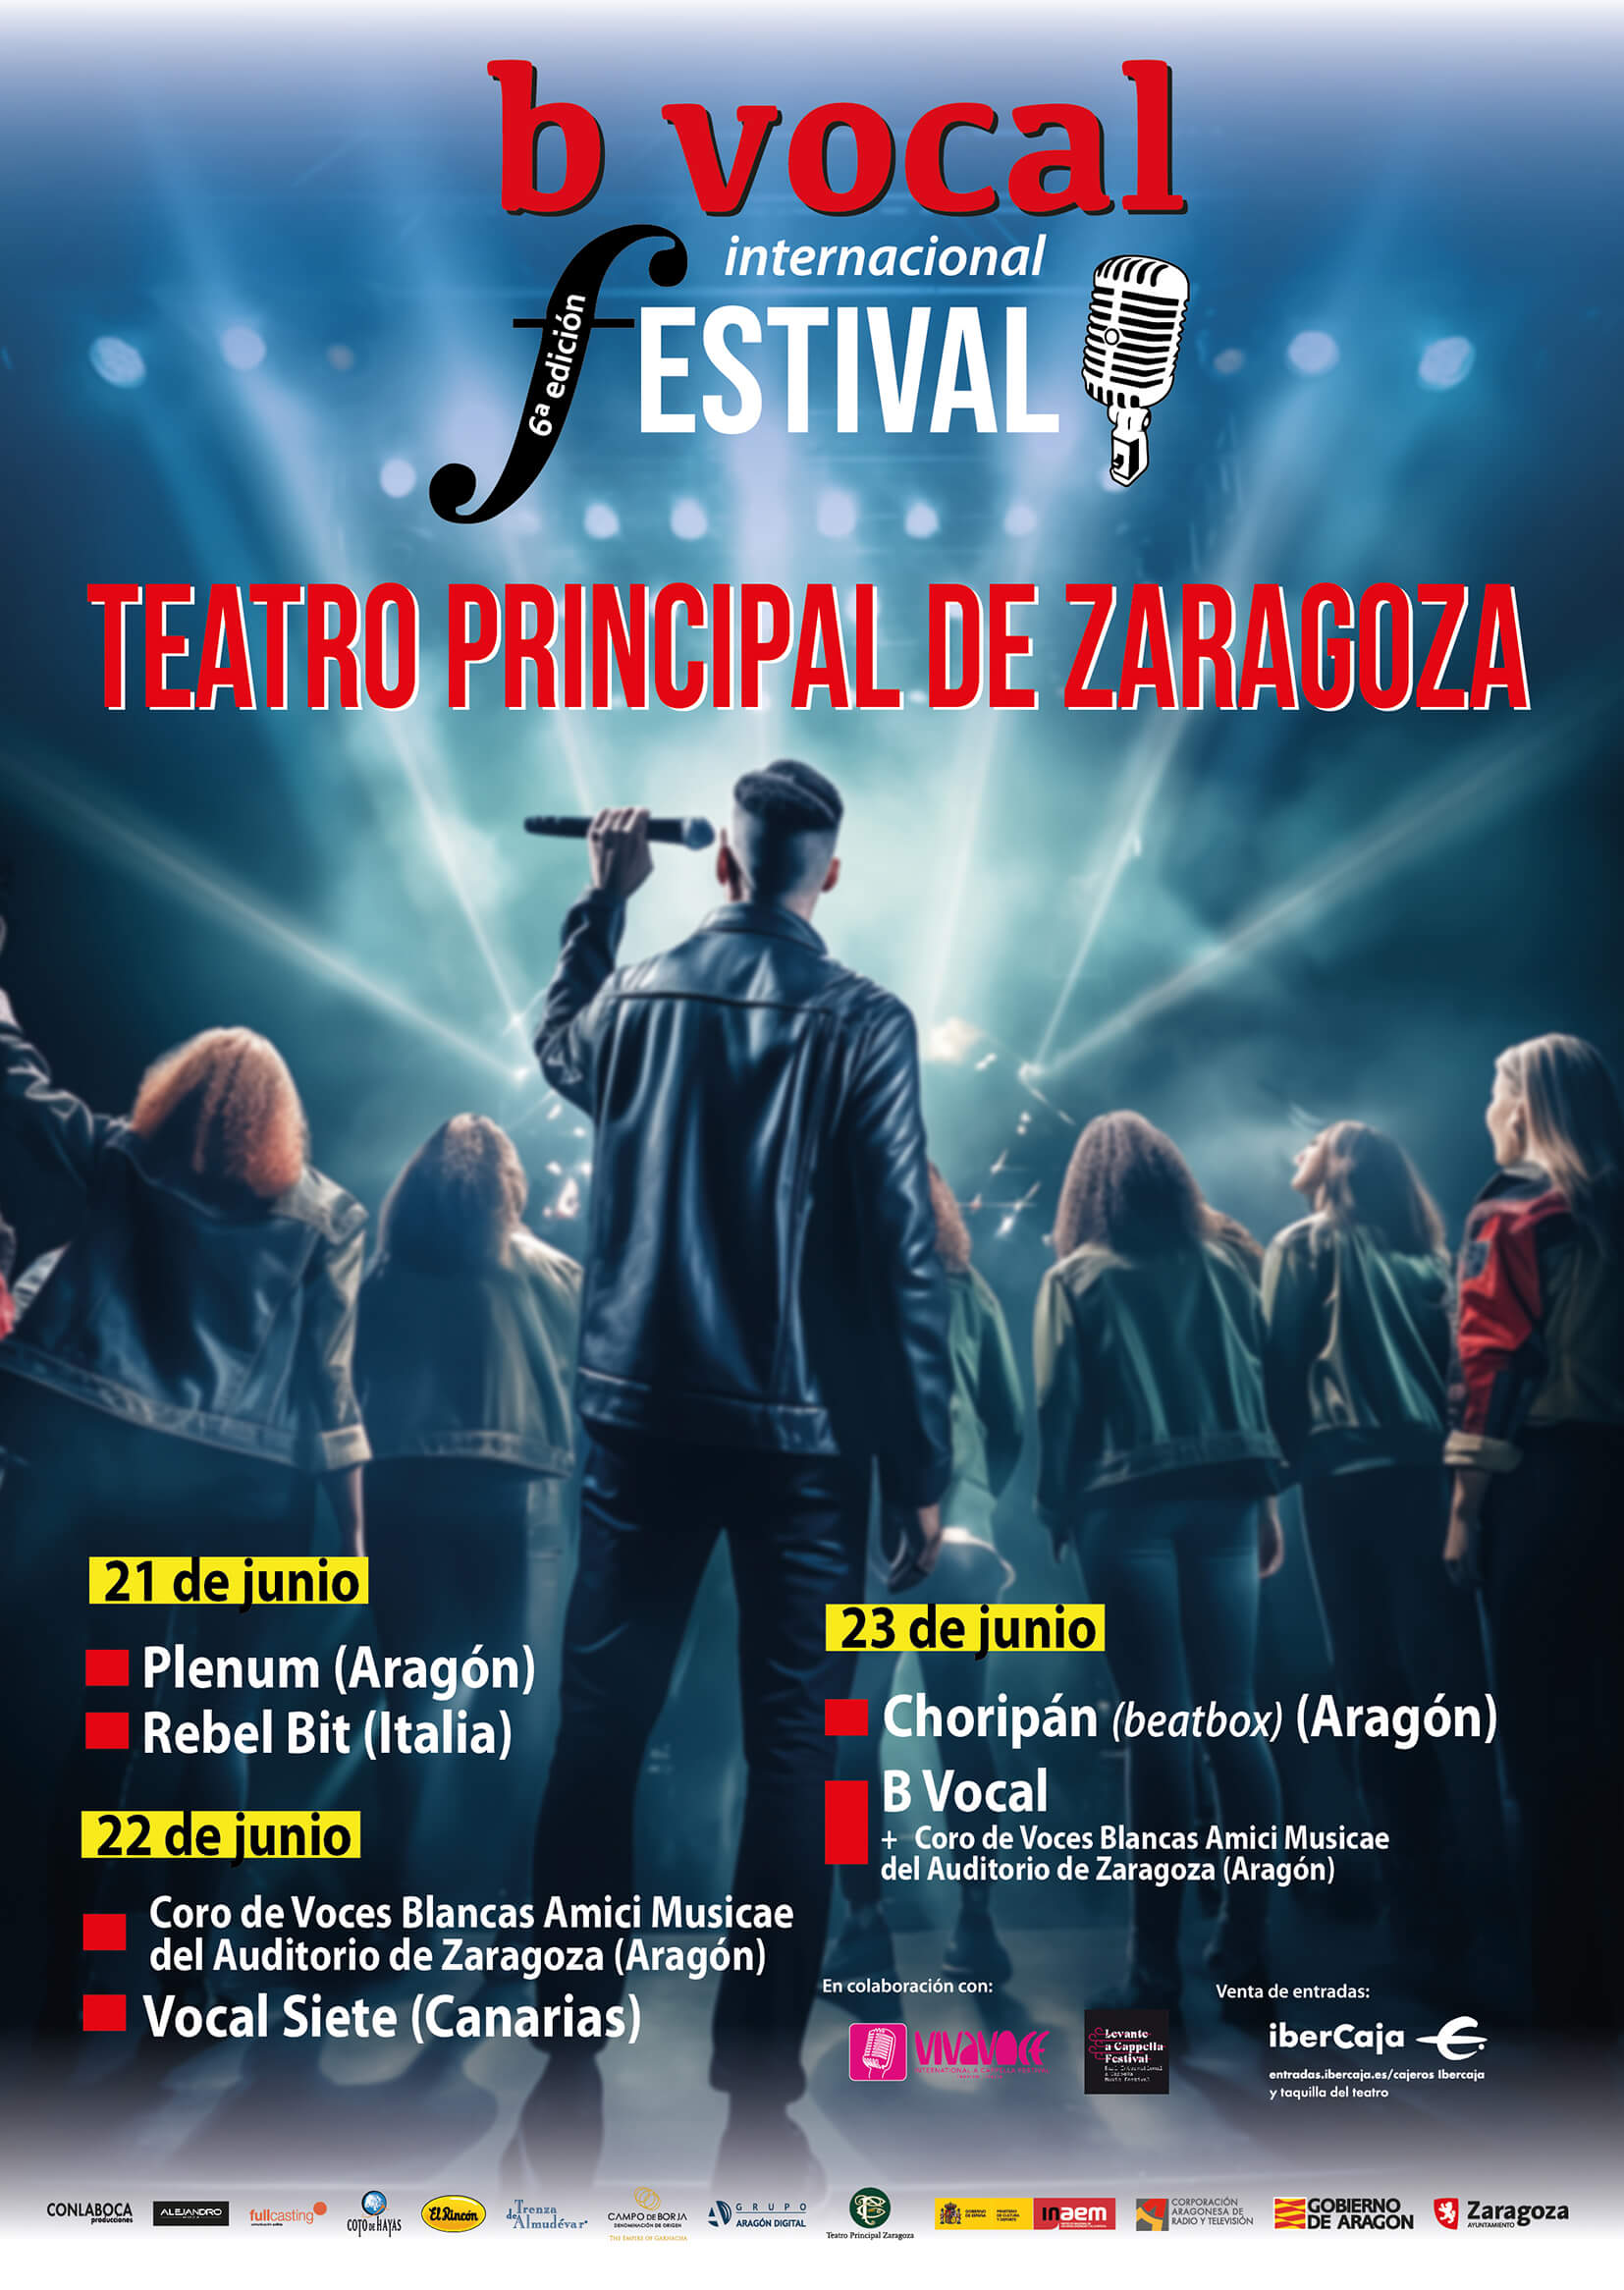 festival bvocal